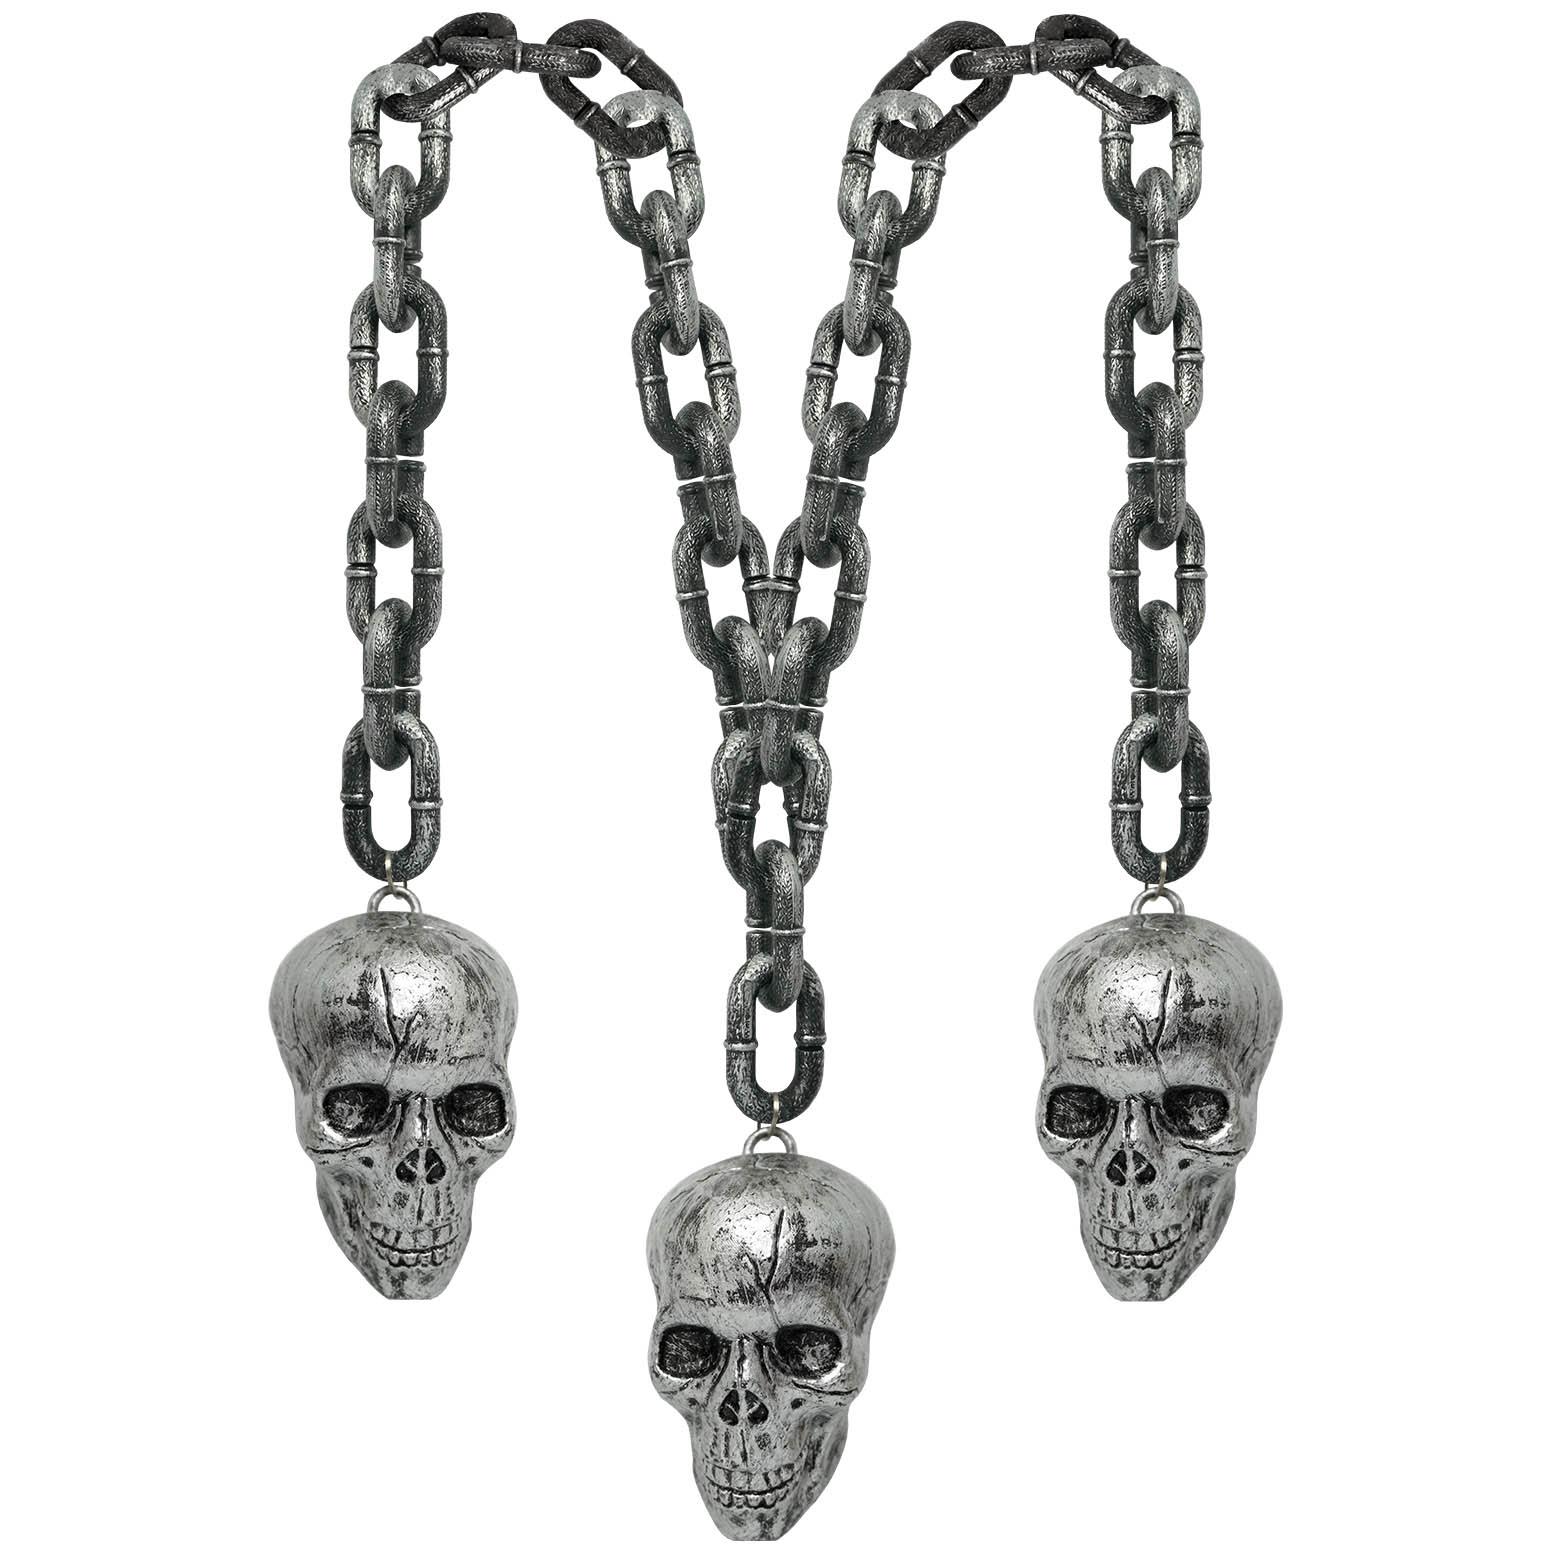 Chain With Human Skeleton